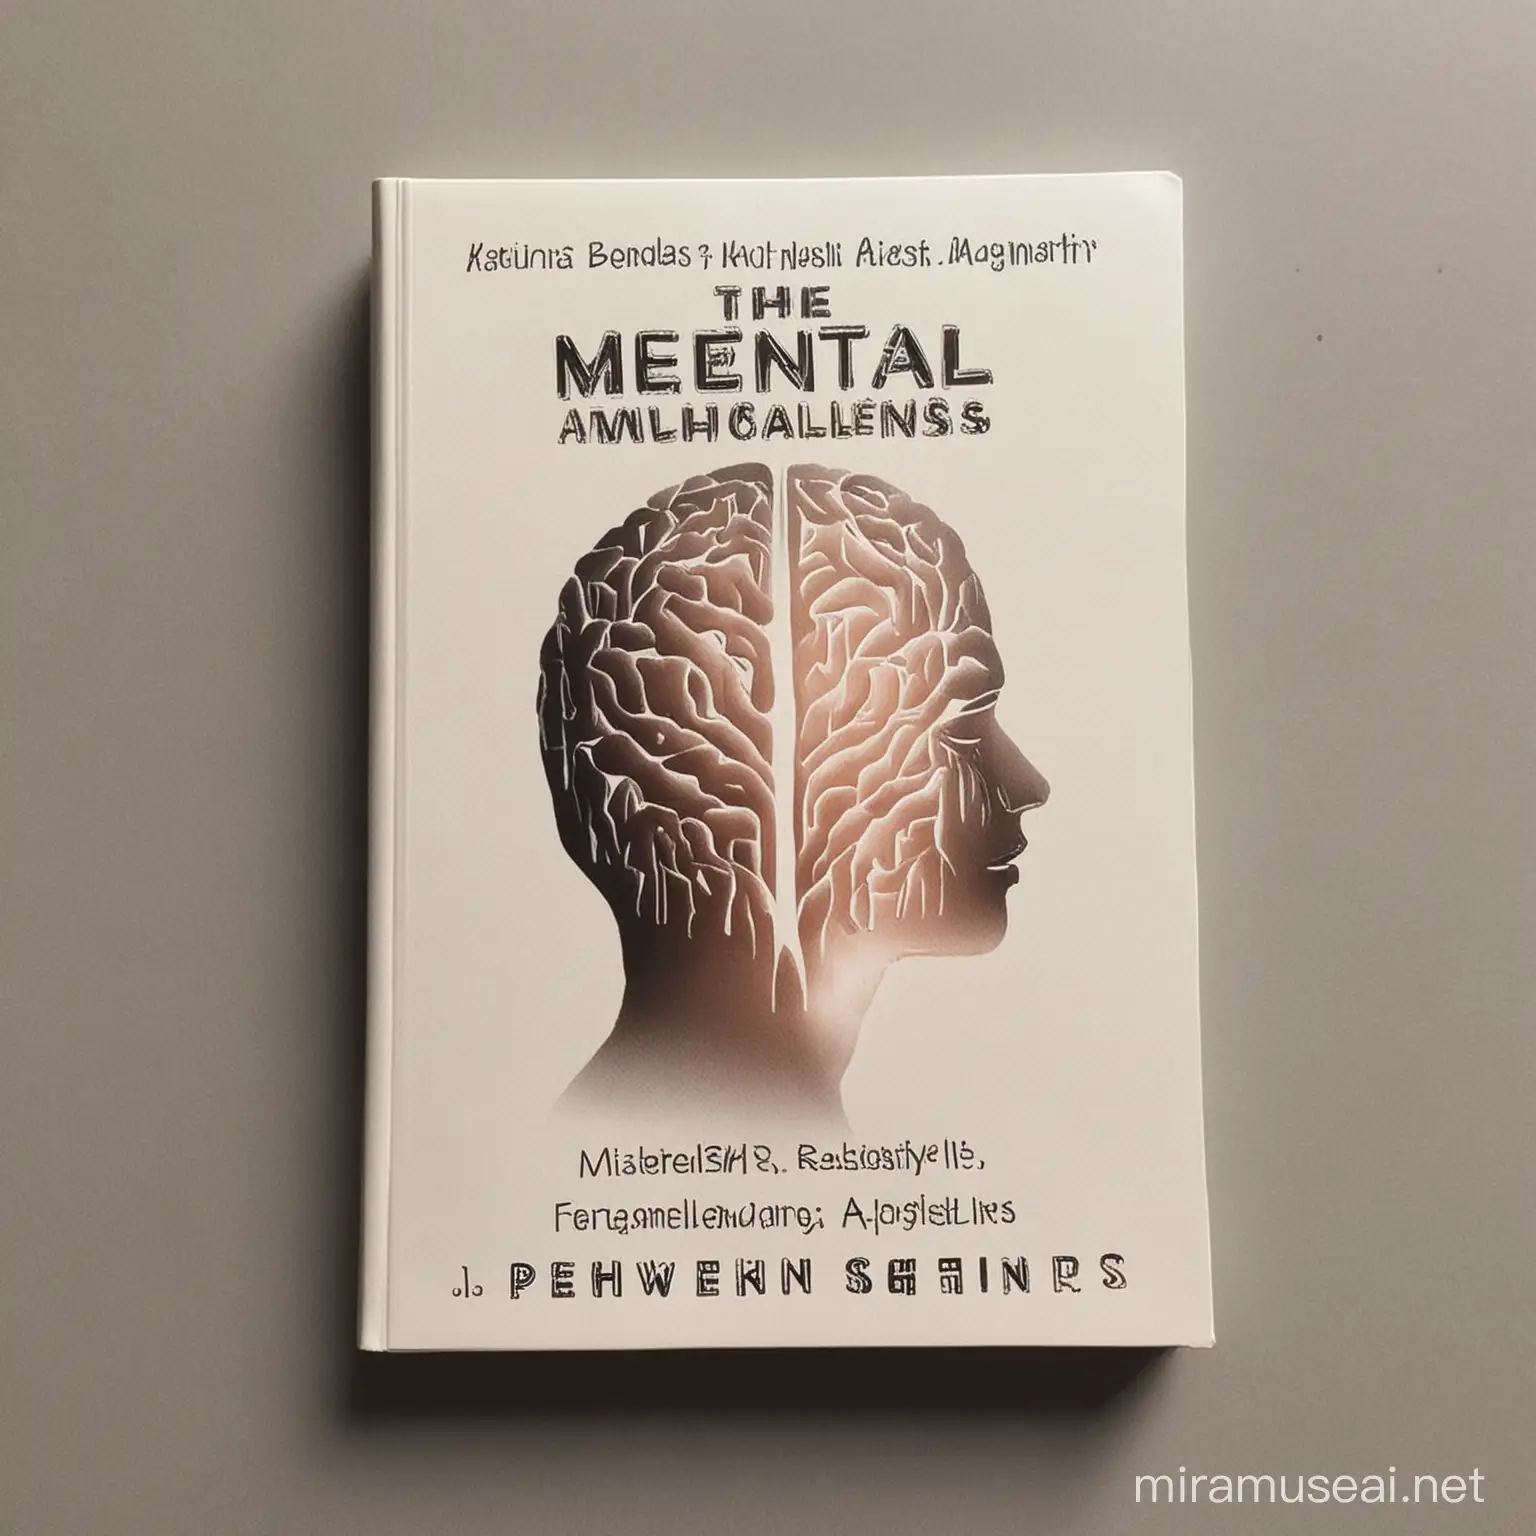 Looking for a new read? Check out this book on mental health awareness. Knowledge is power! Make sure the book is in english